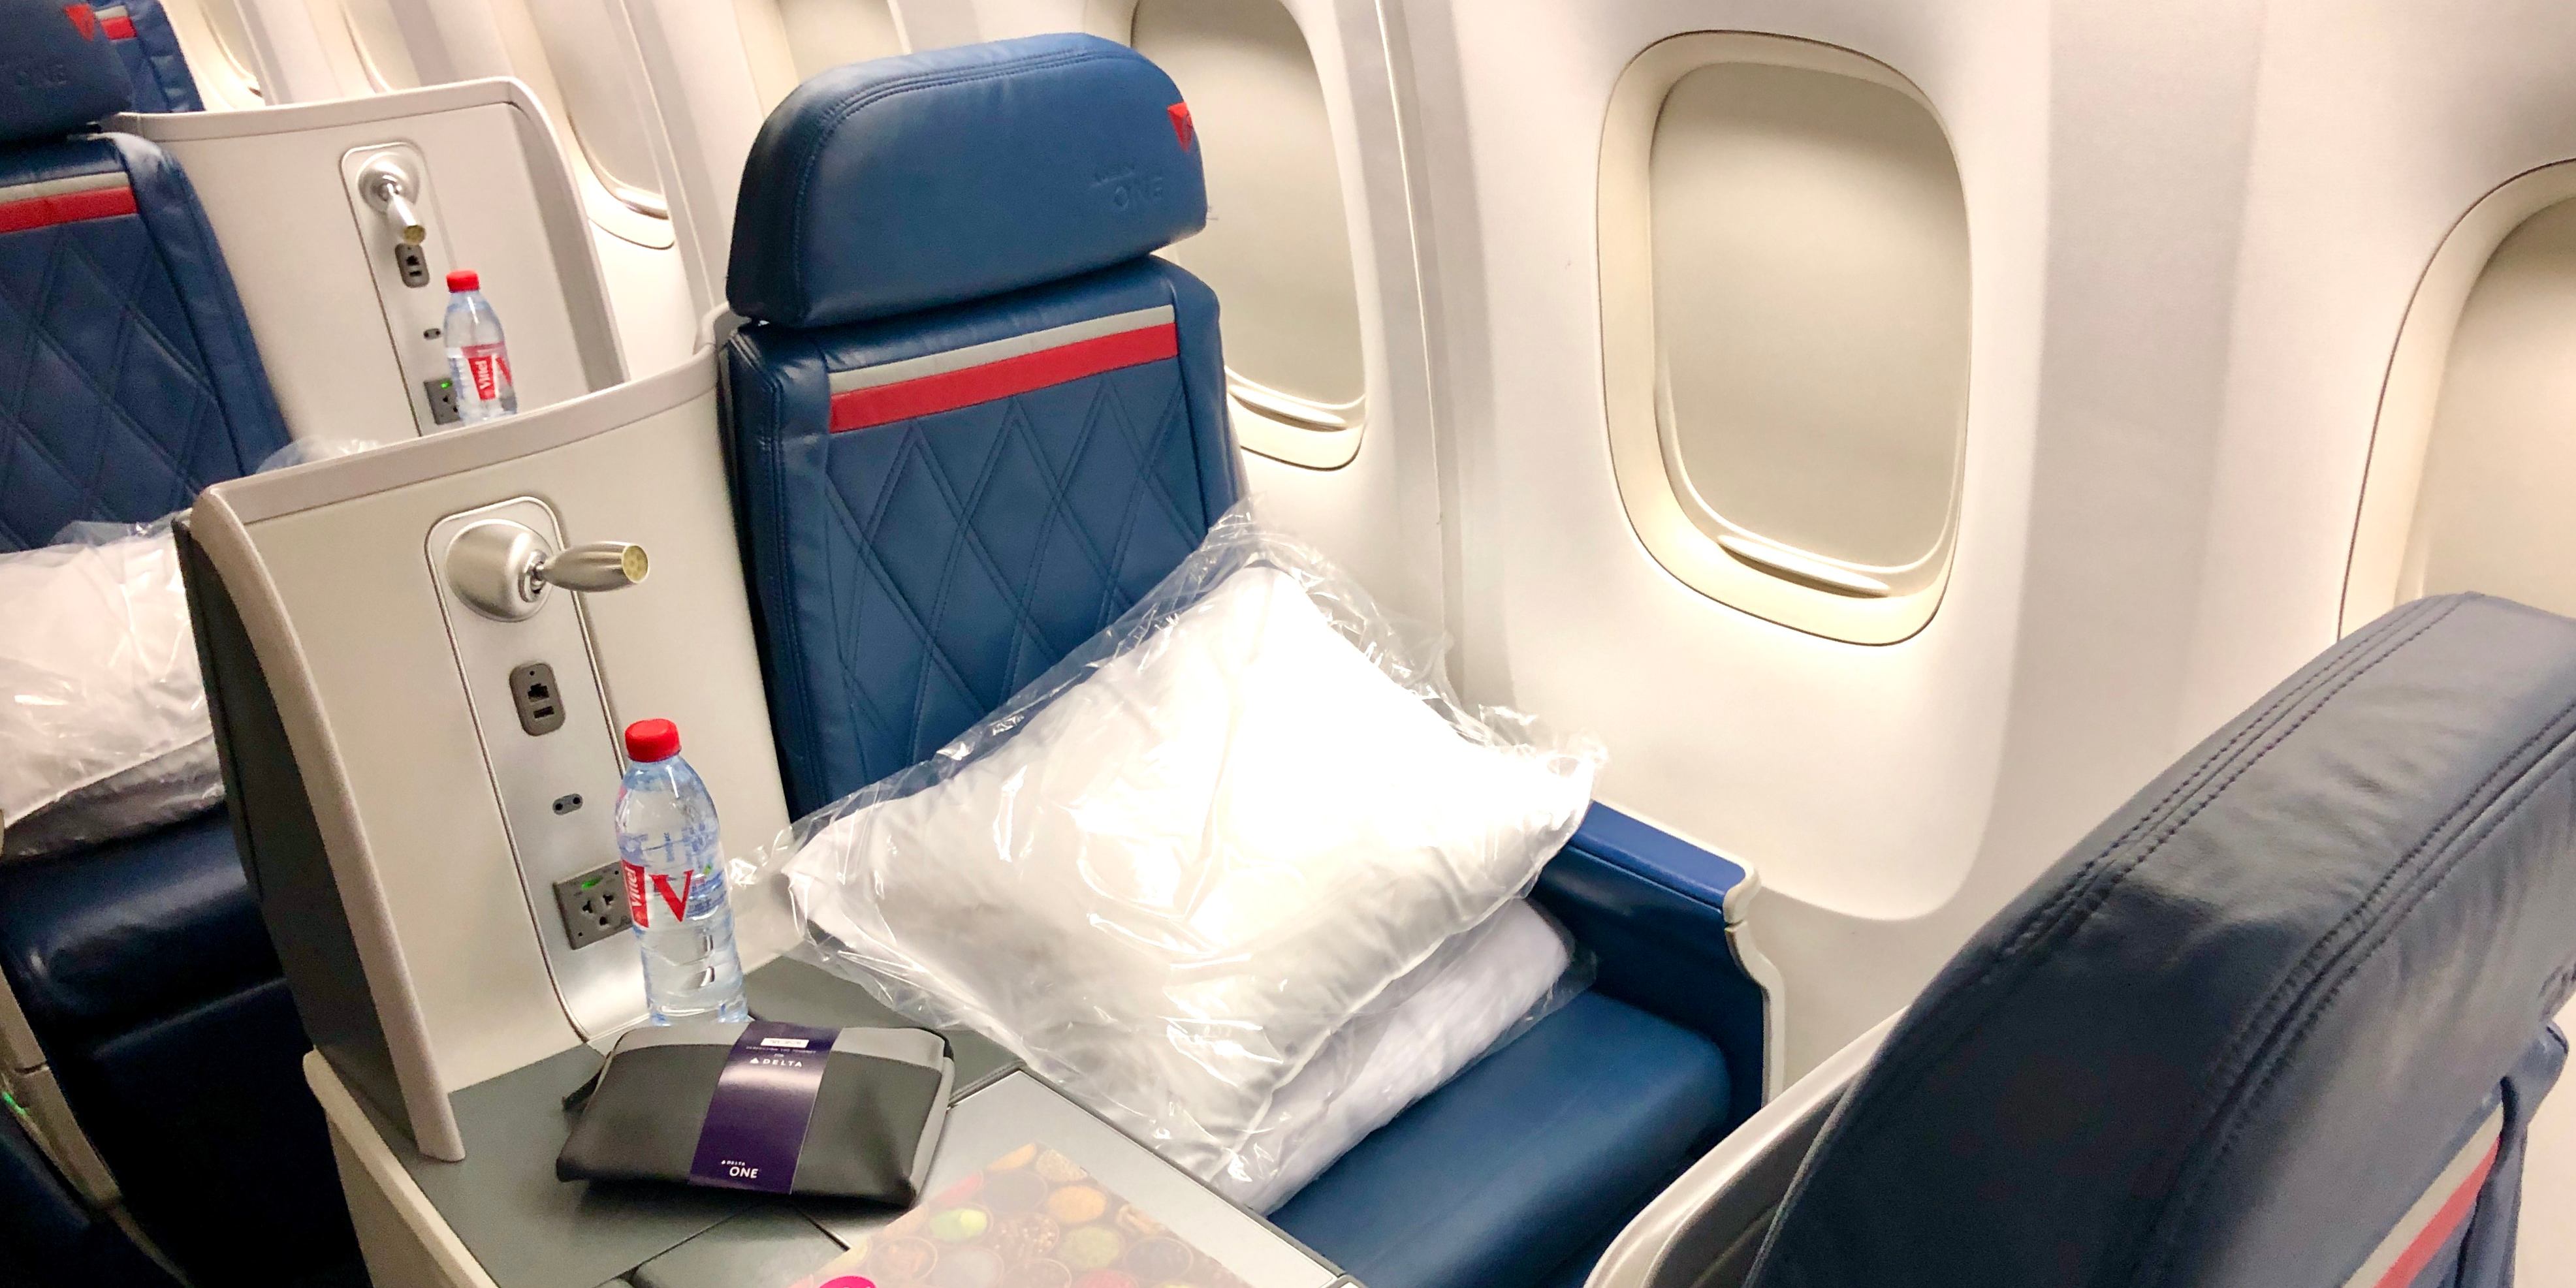 I flew Delta’s reviled 767 business class seat from Europe to New York. Here’s what it was actually like. (DAL)